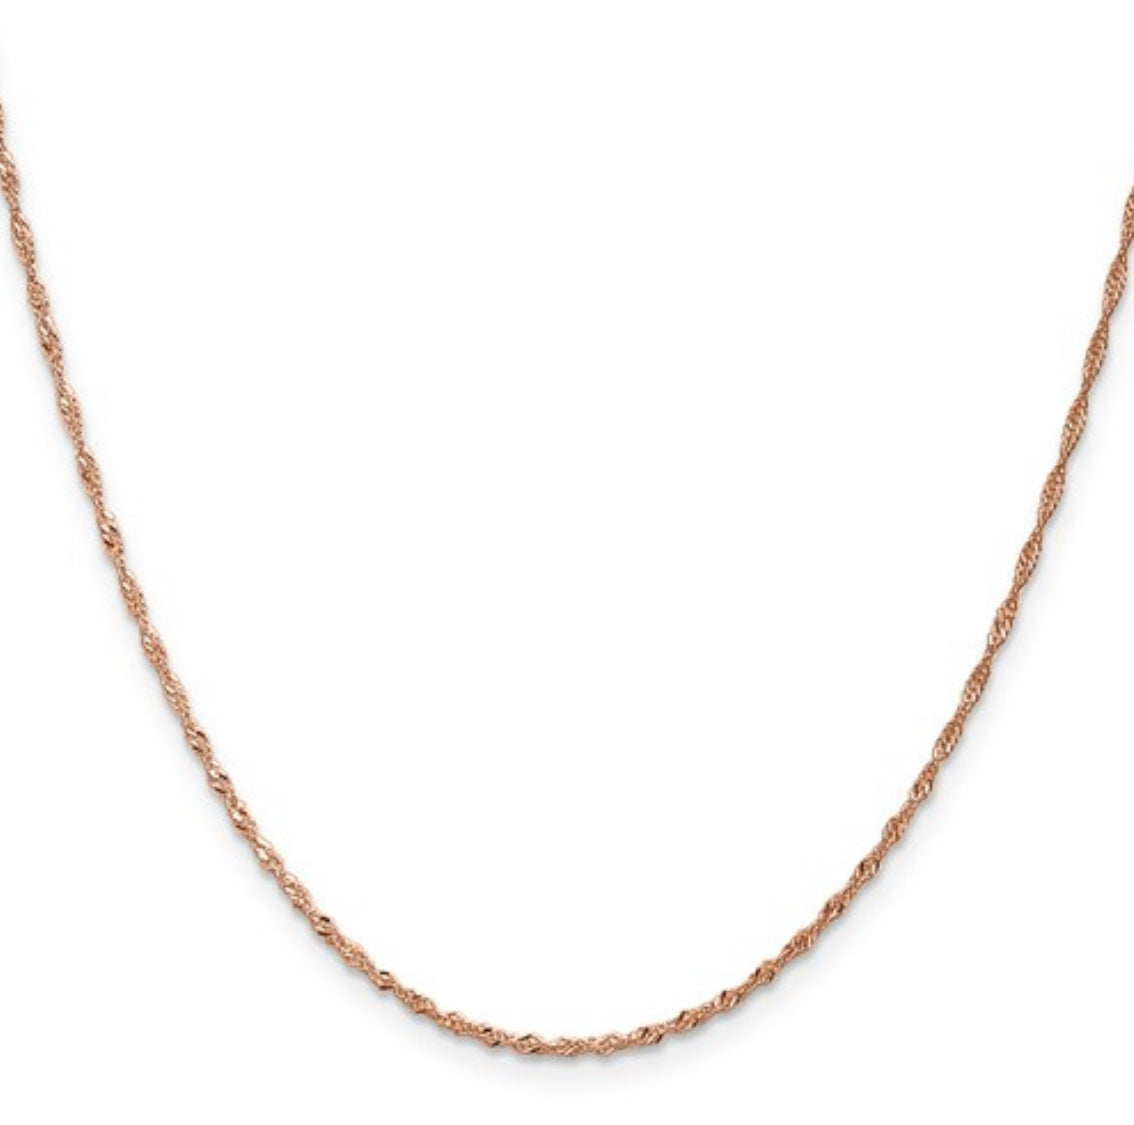 14K Rose Gold Singapore Chain - 1.0mm